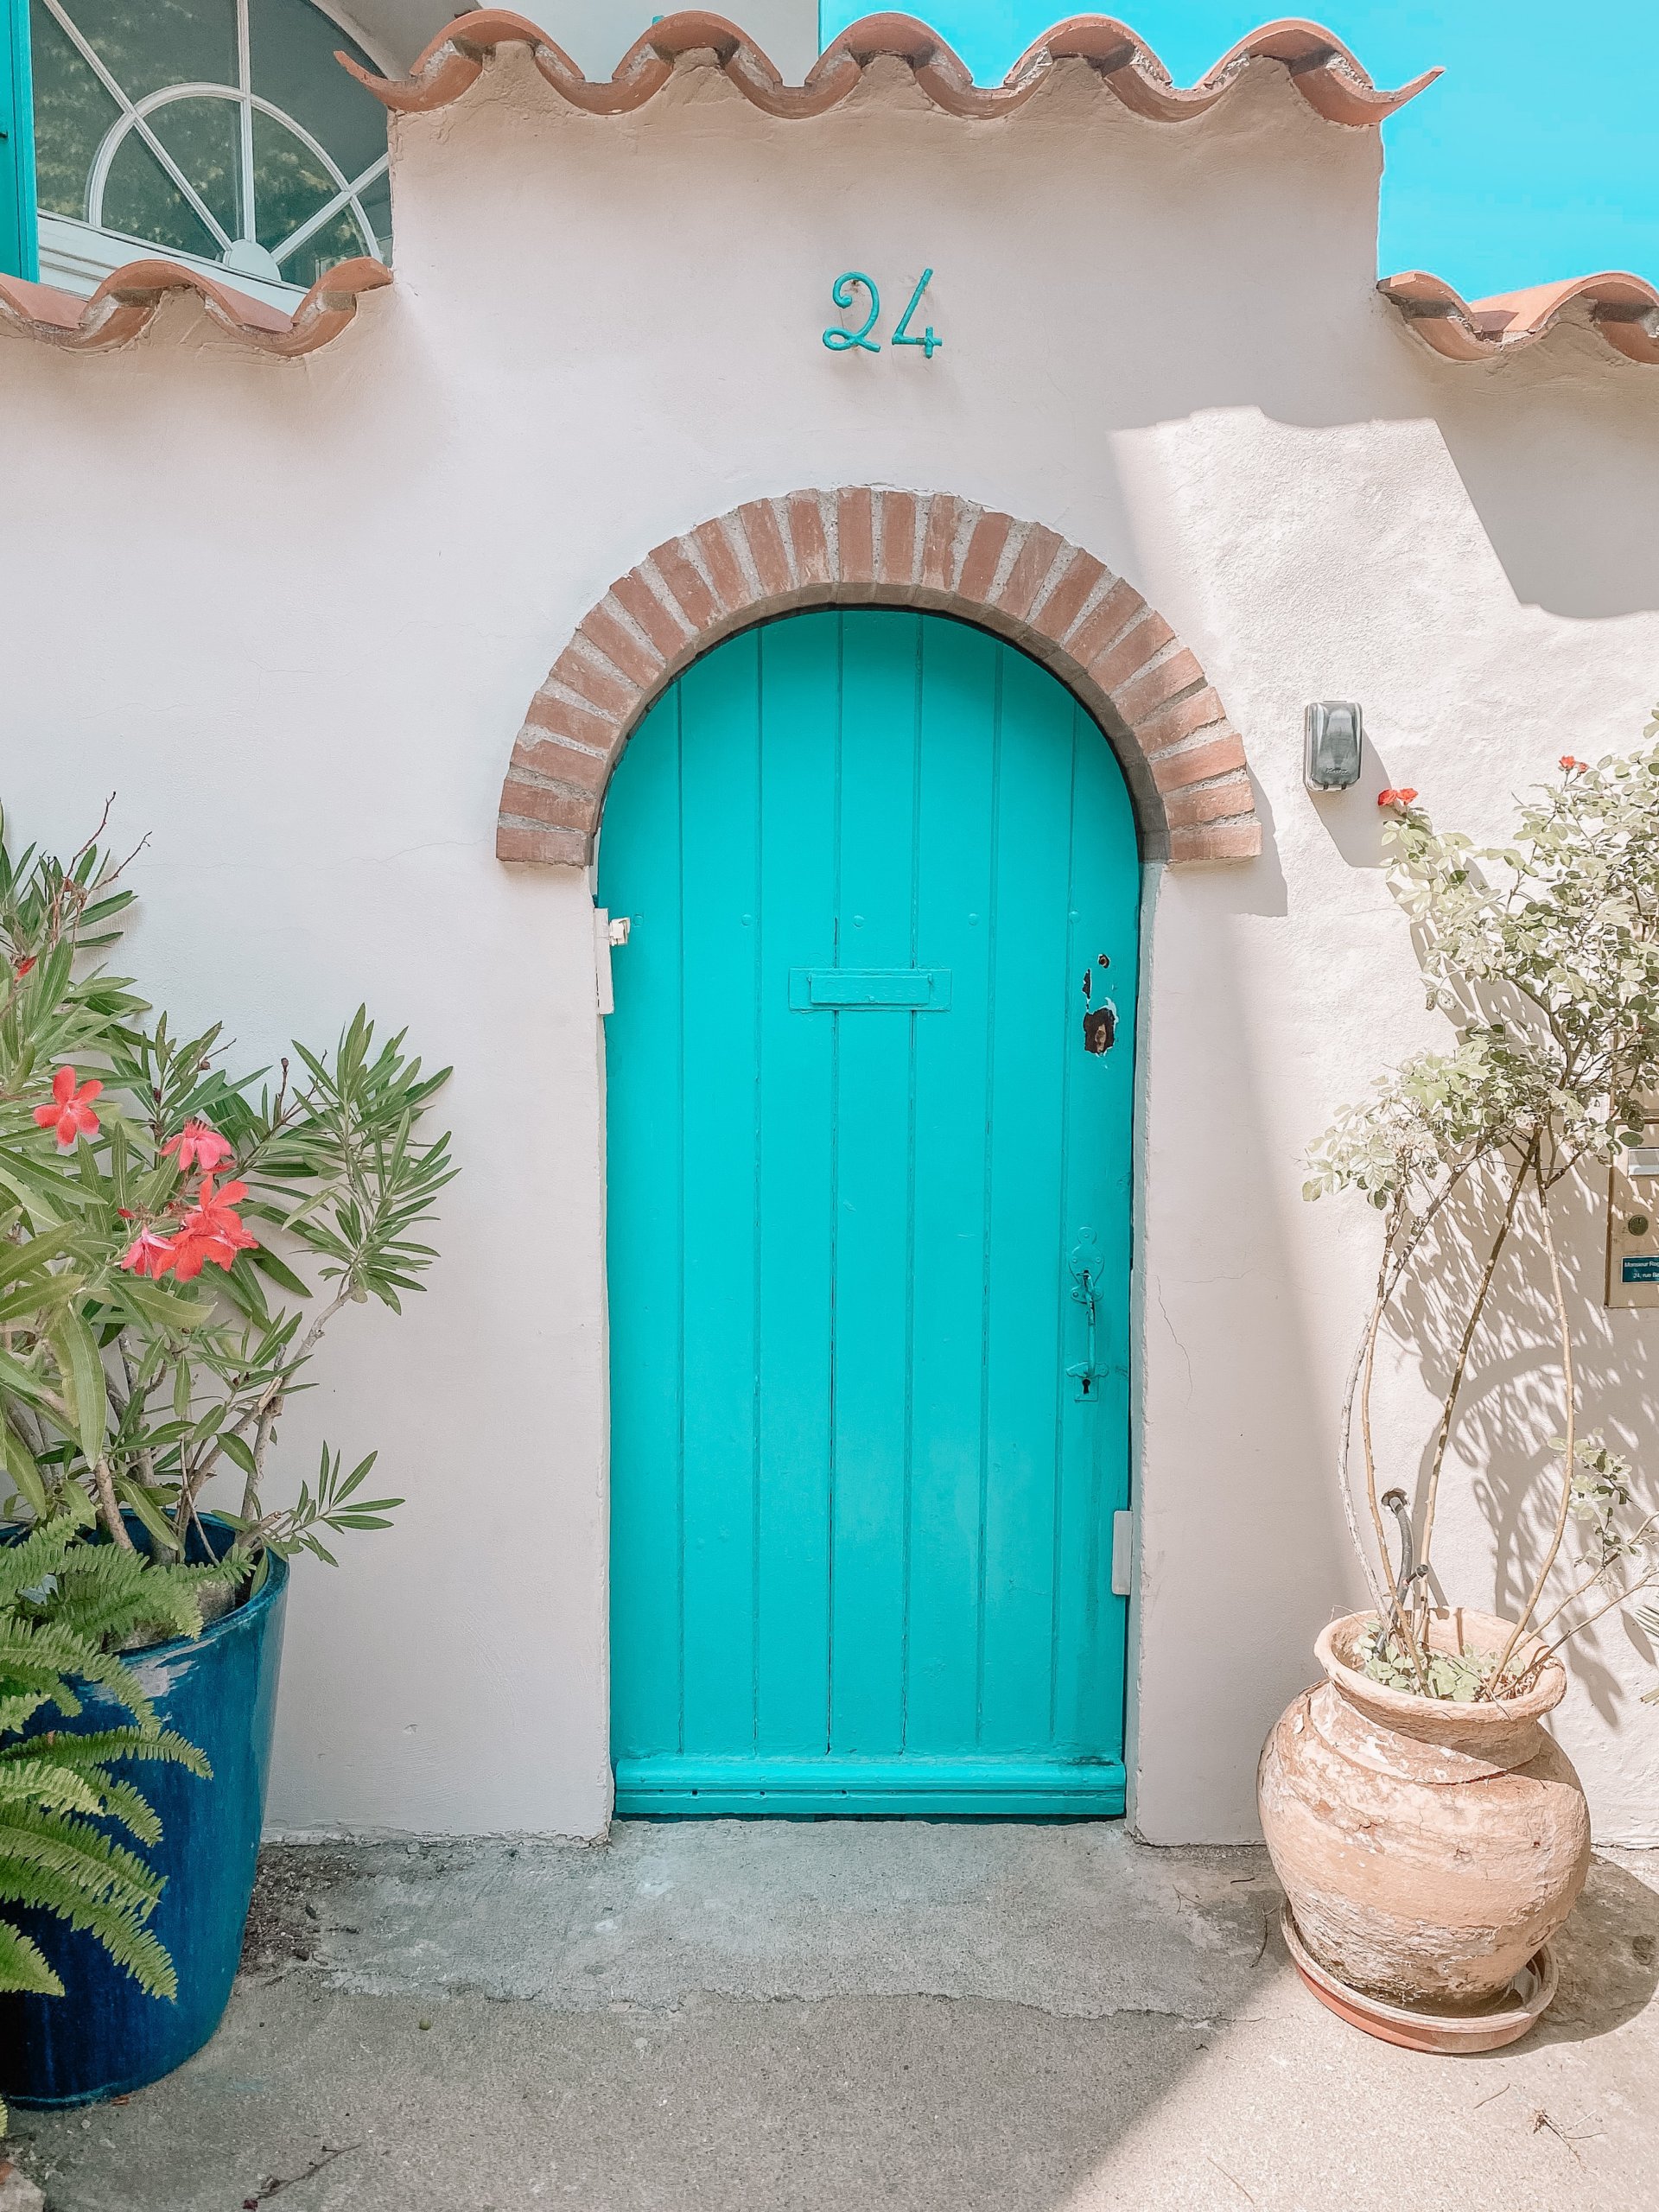 Arched blue door with number 24